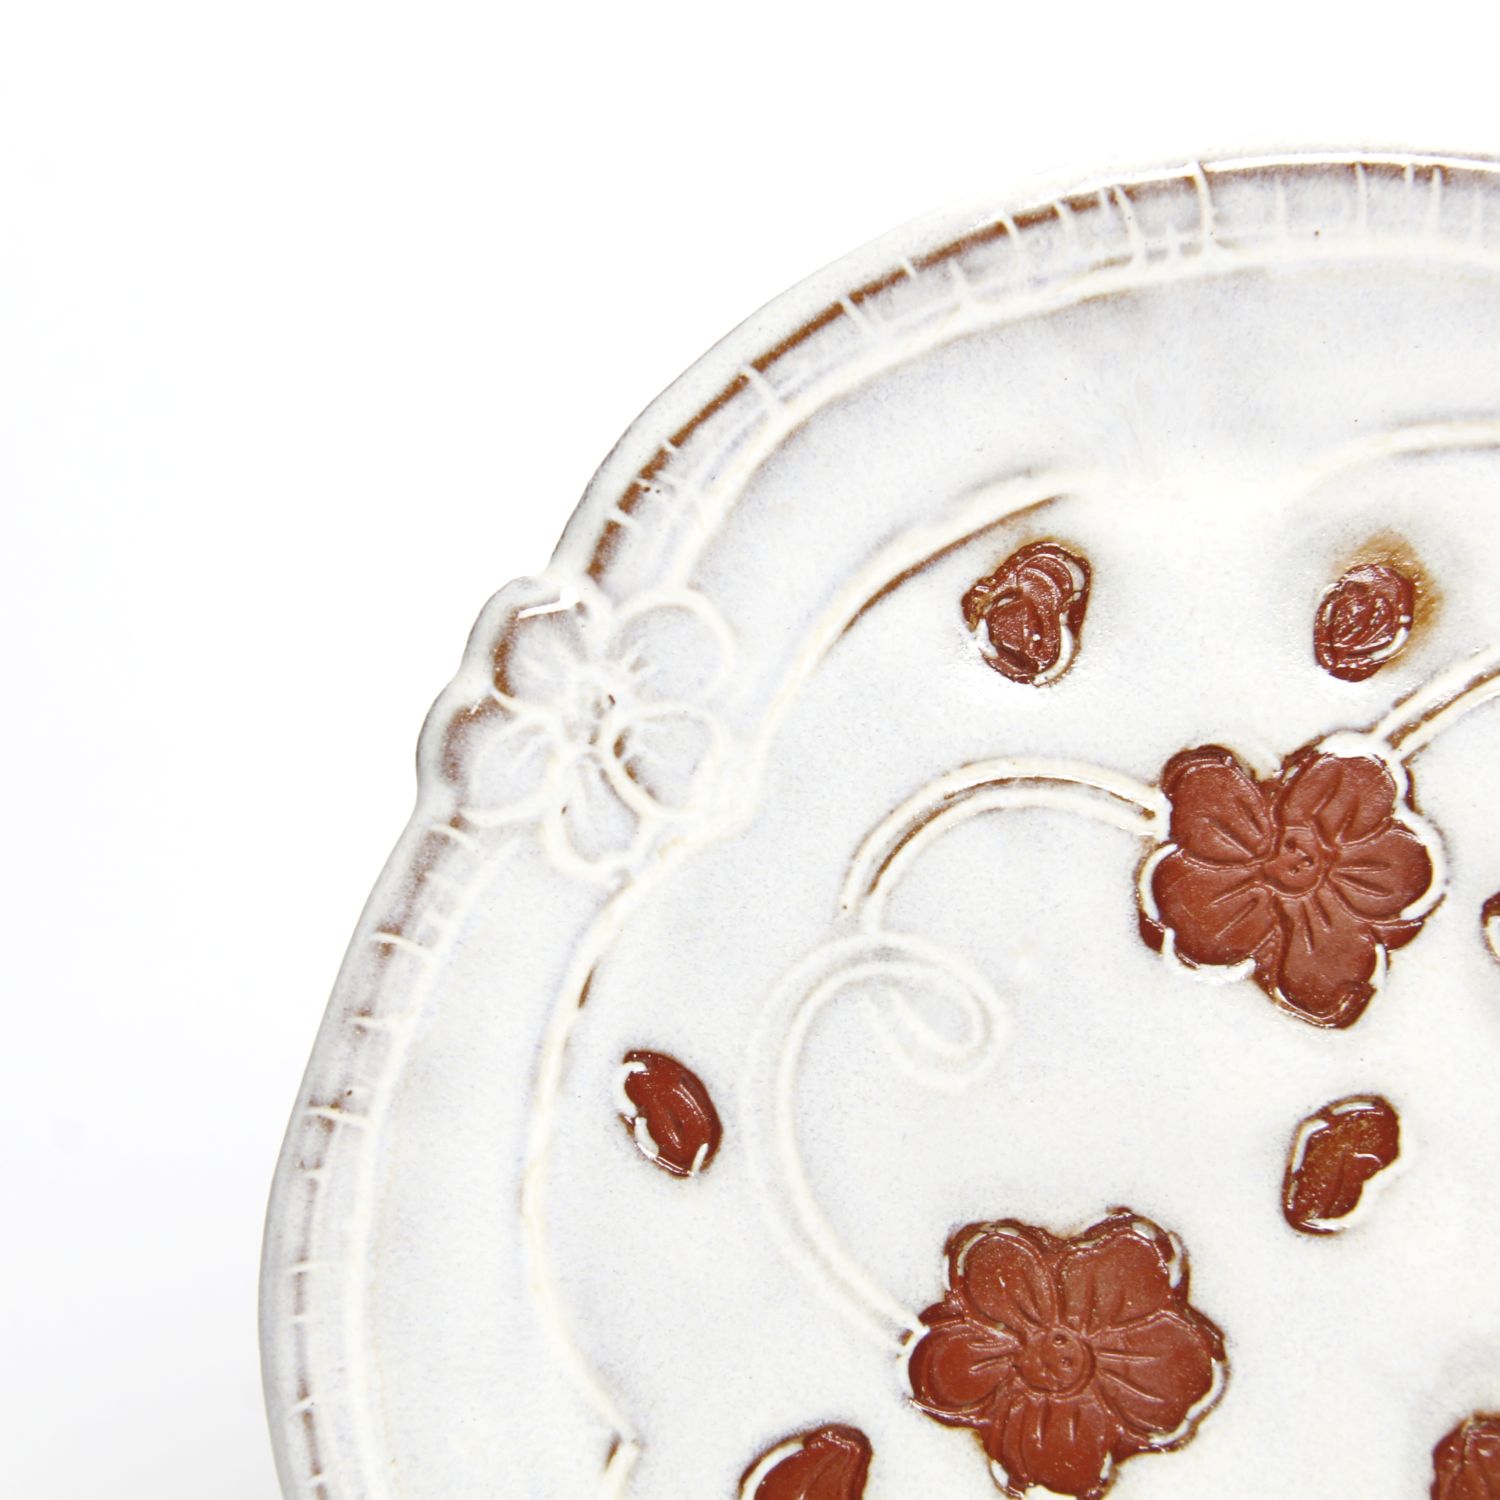 Zoe Pinnell: Small White Floral Plate Product Image 3 of 3